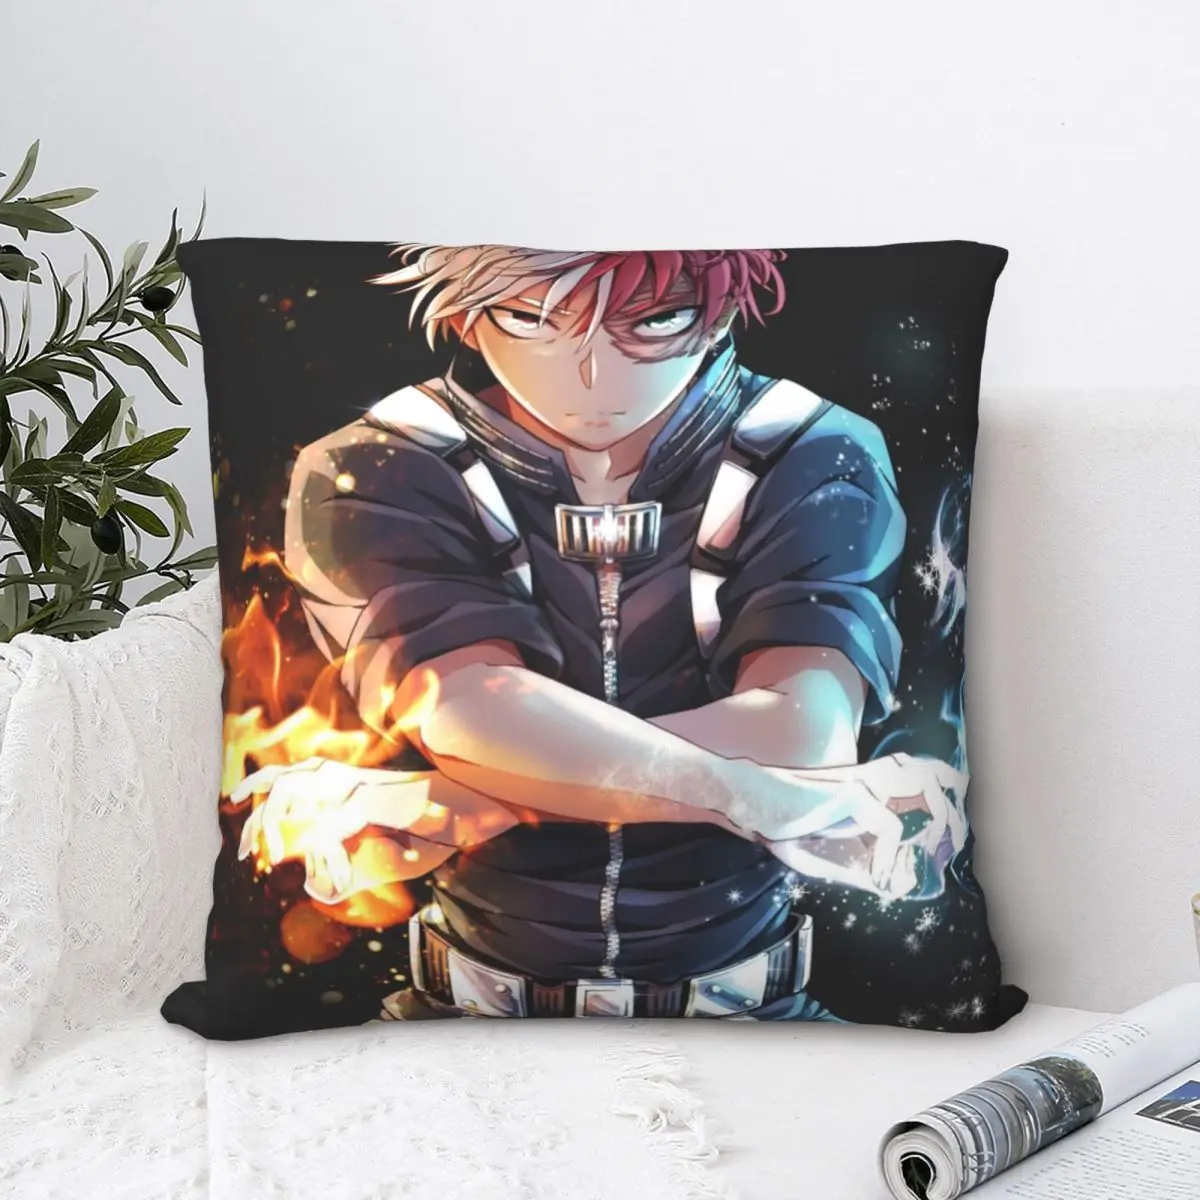 

Todoroki BNHA Square Pillowcase Cushion Cover funny Zip Home Decorative Polyester Pillow Case for Home Simple 45*45cm